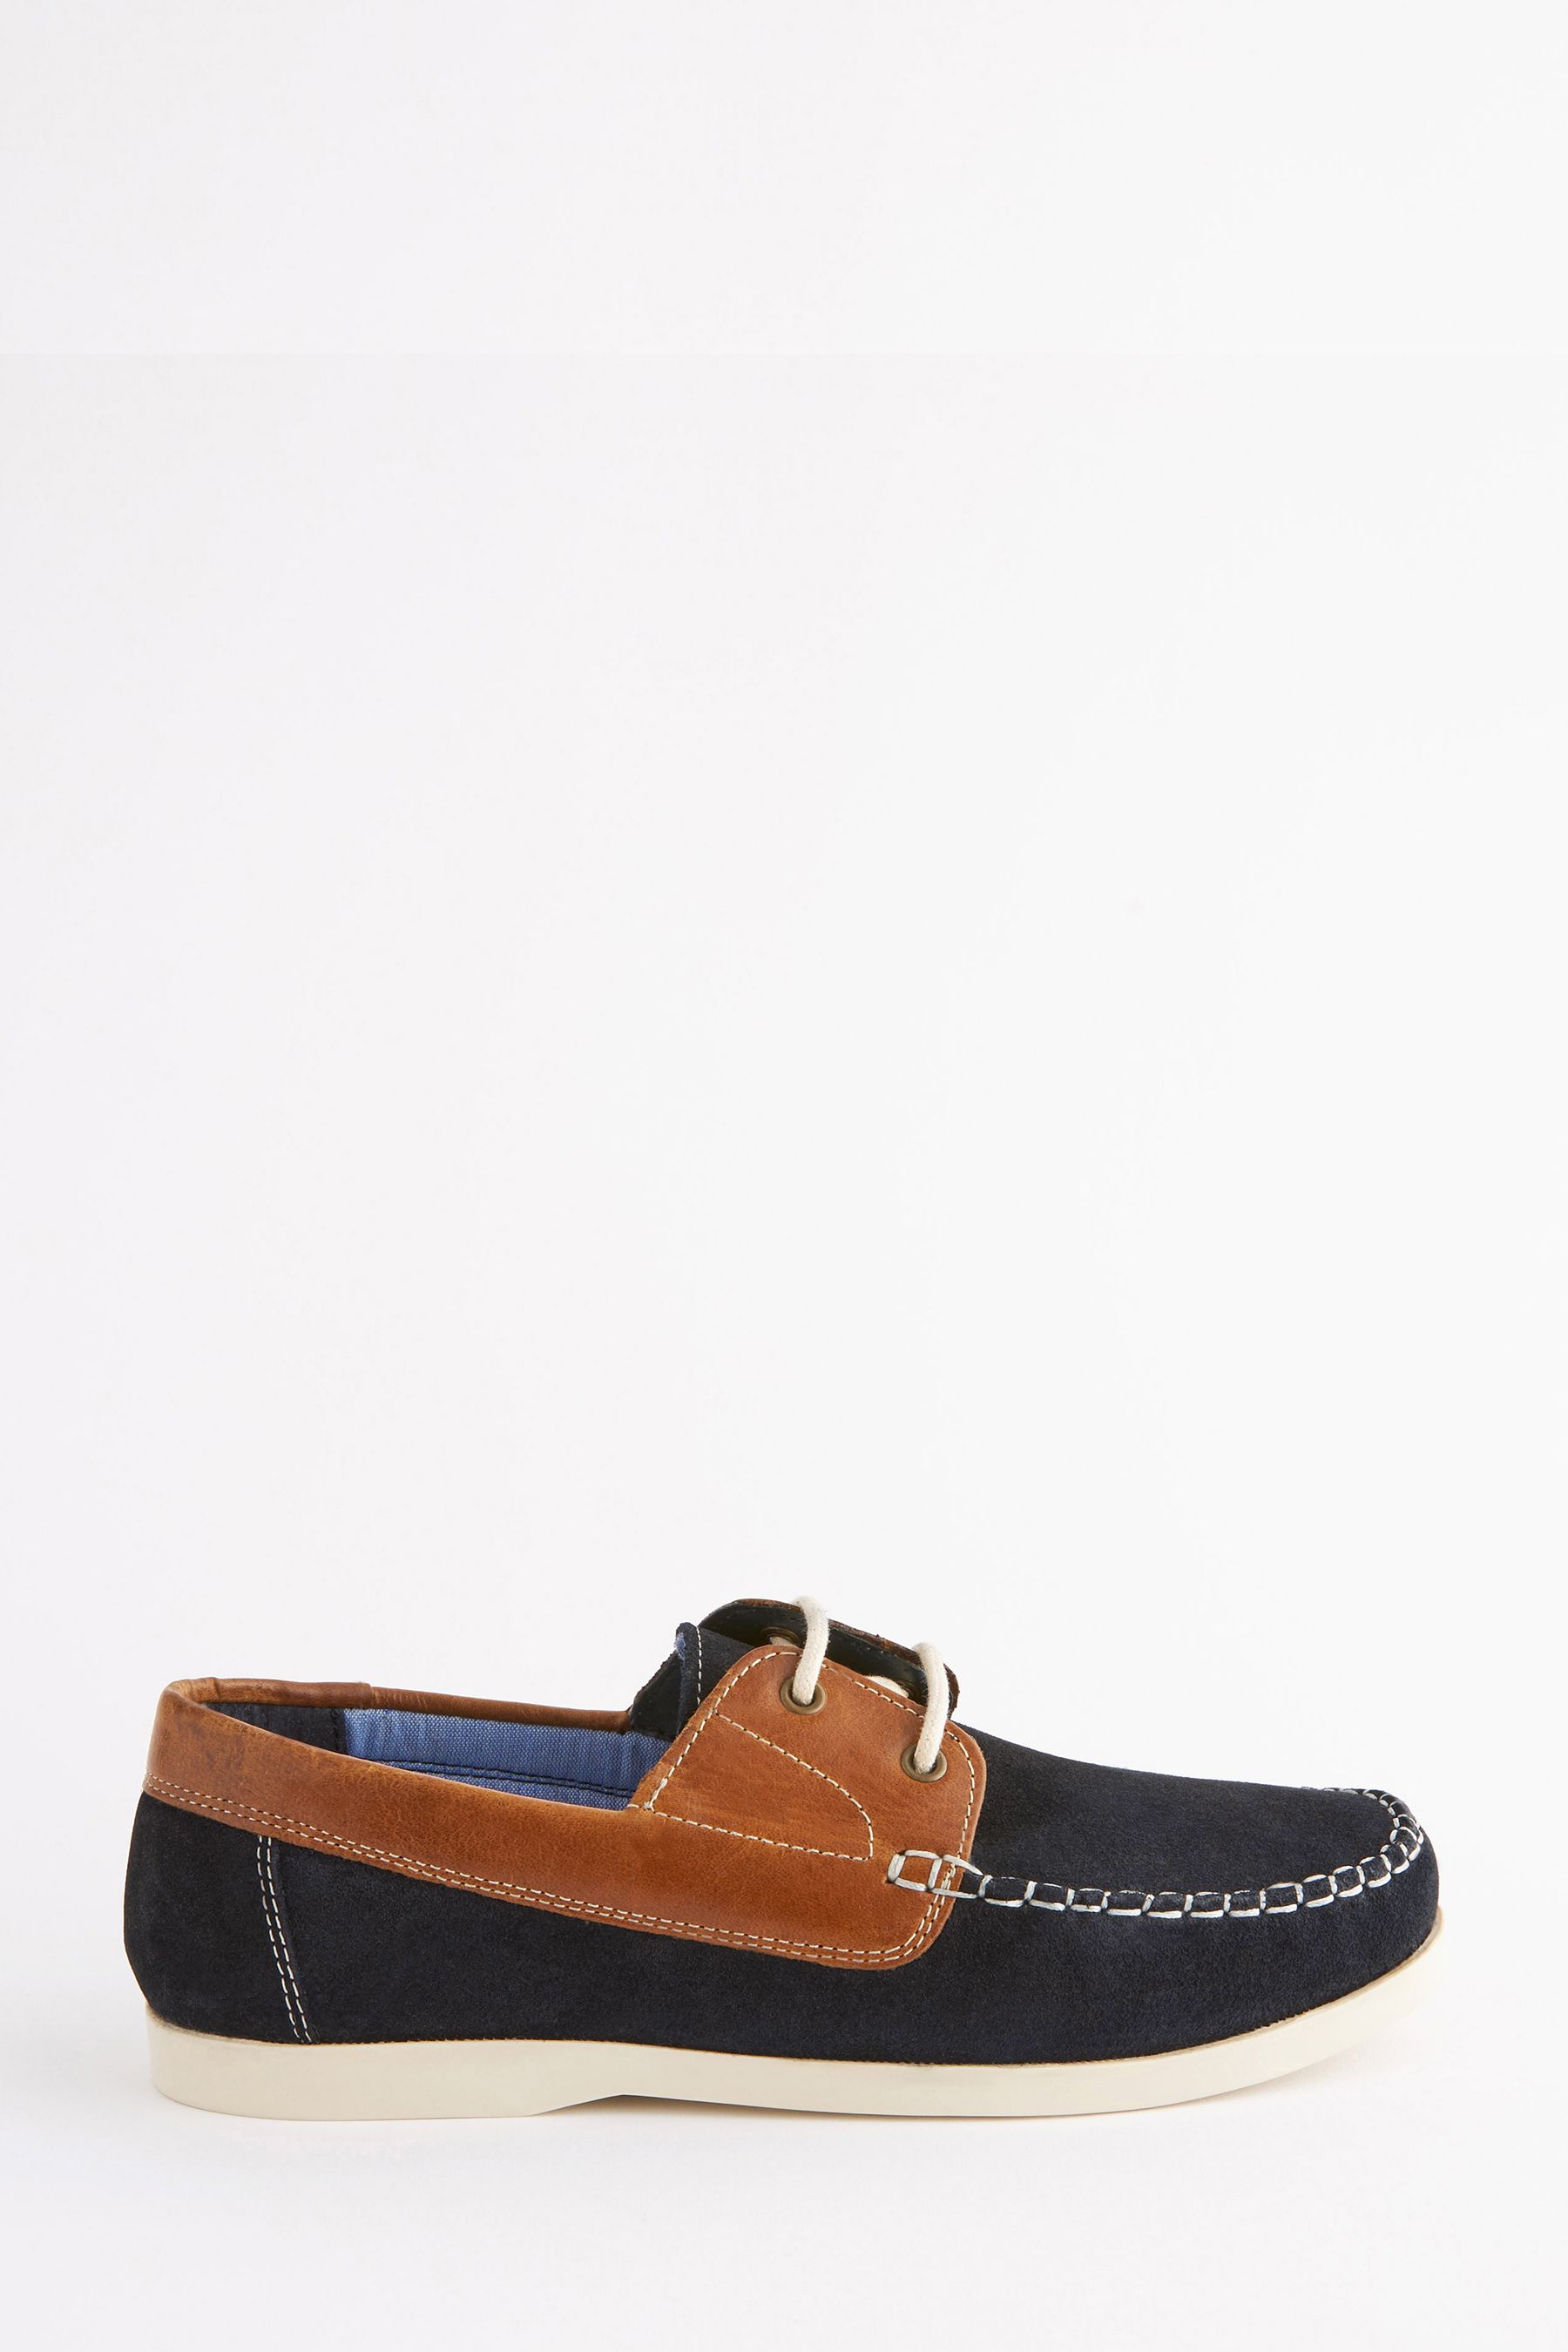 Buy Tan Brown/Navy Blue Leather Boat Shoes from the Next UK online shop